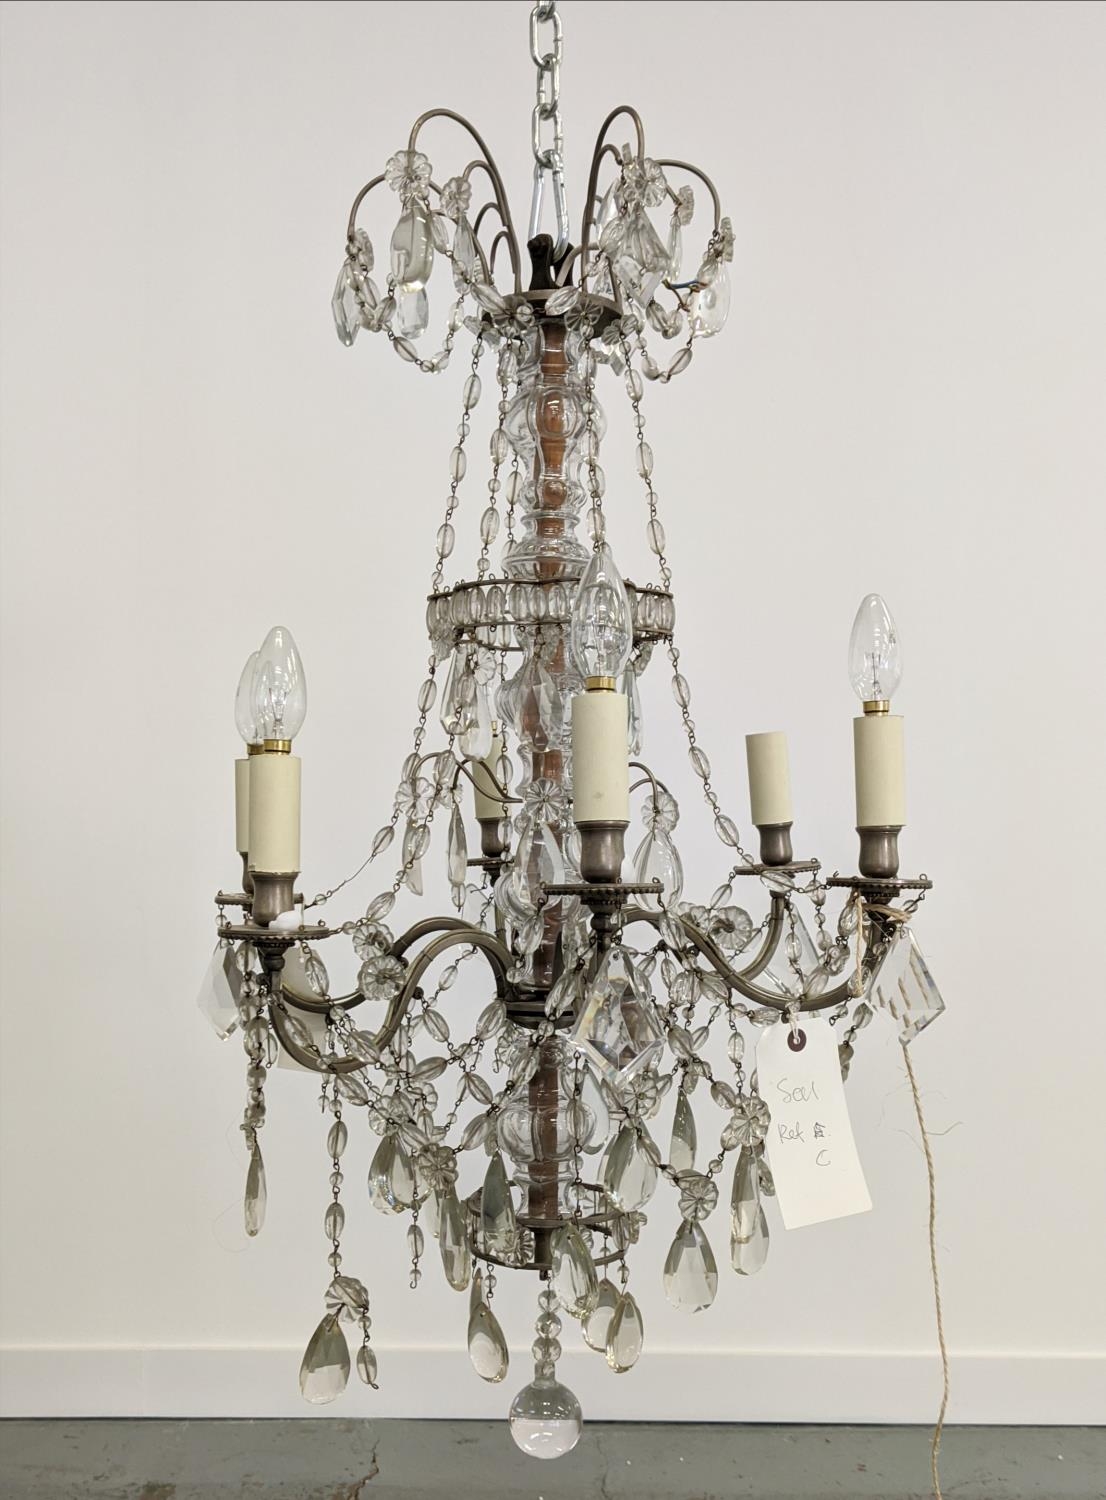 CHANDELIER with a metal frame and six branches, approx 90cm H x 45cm W.